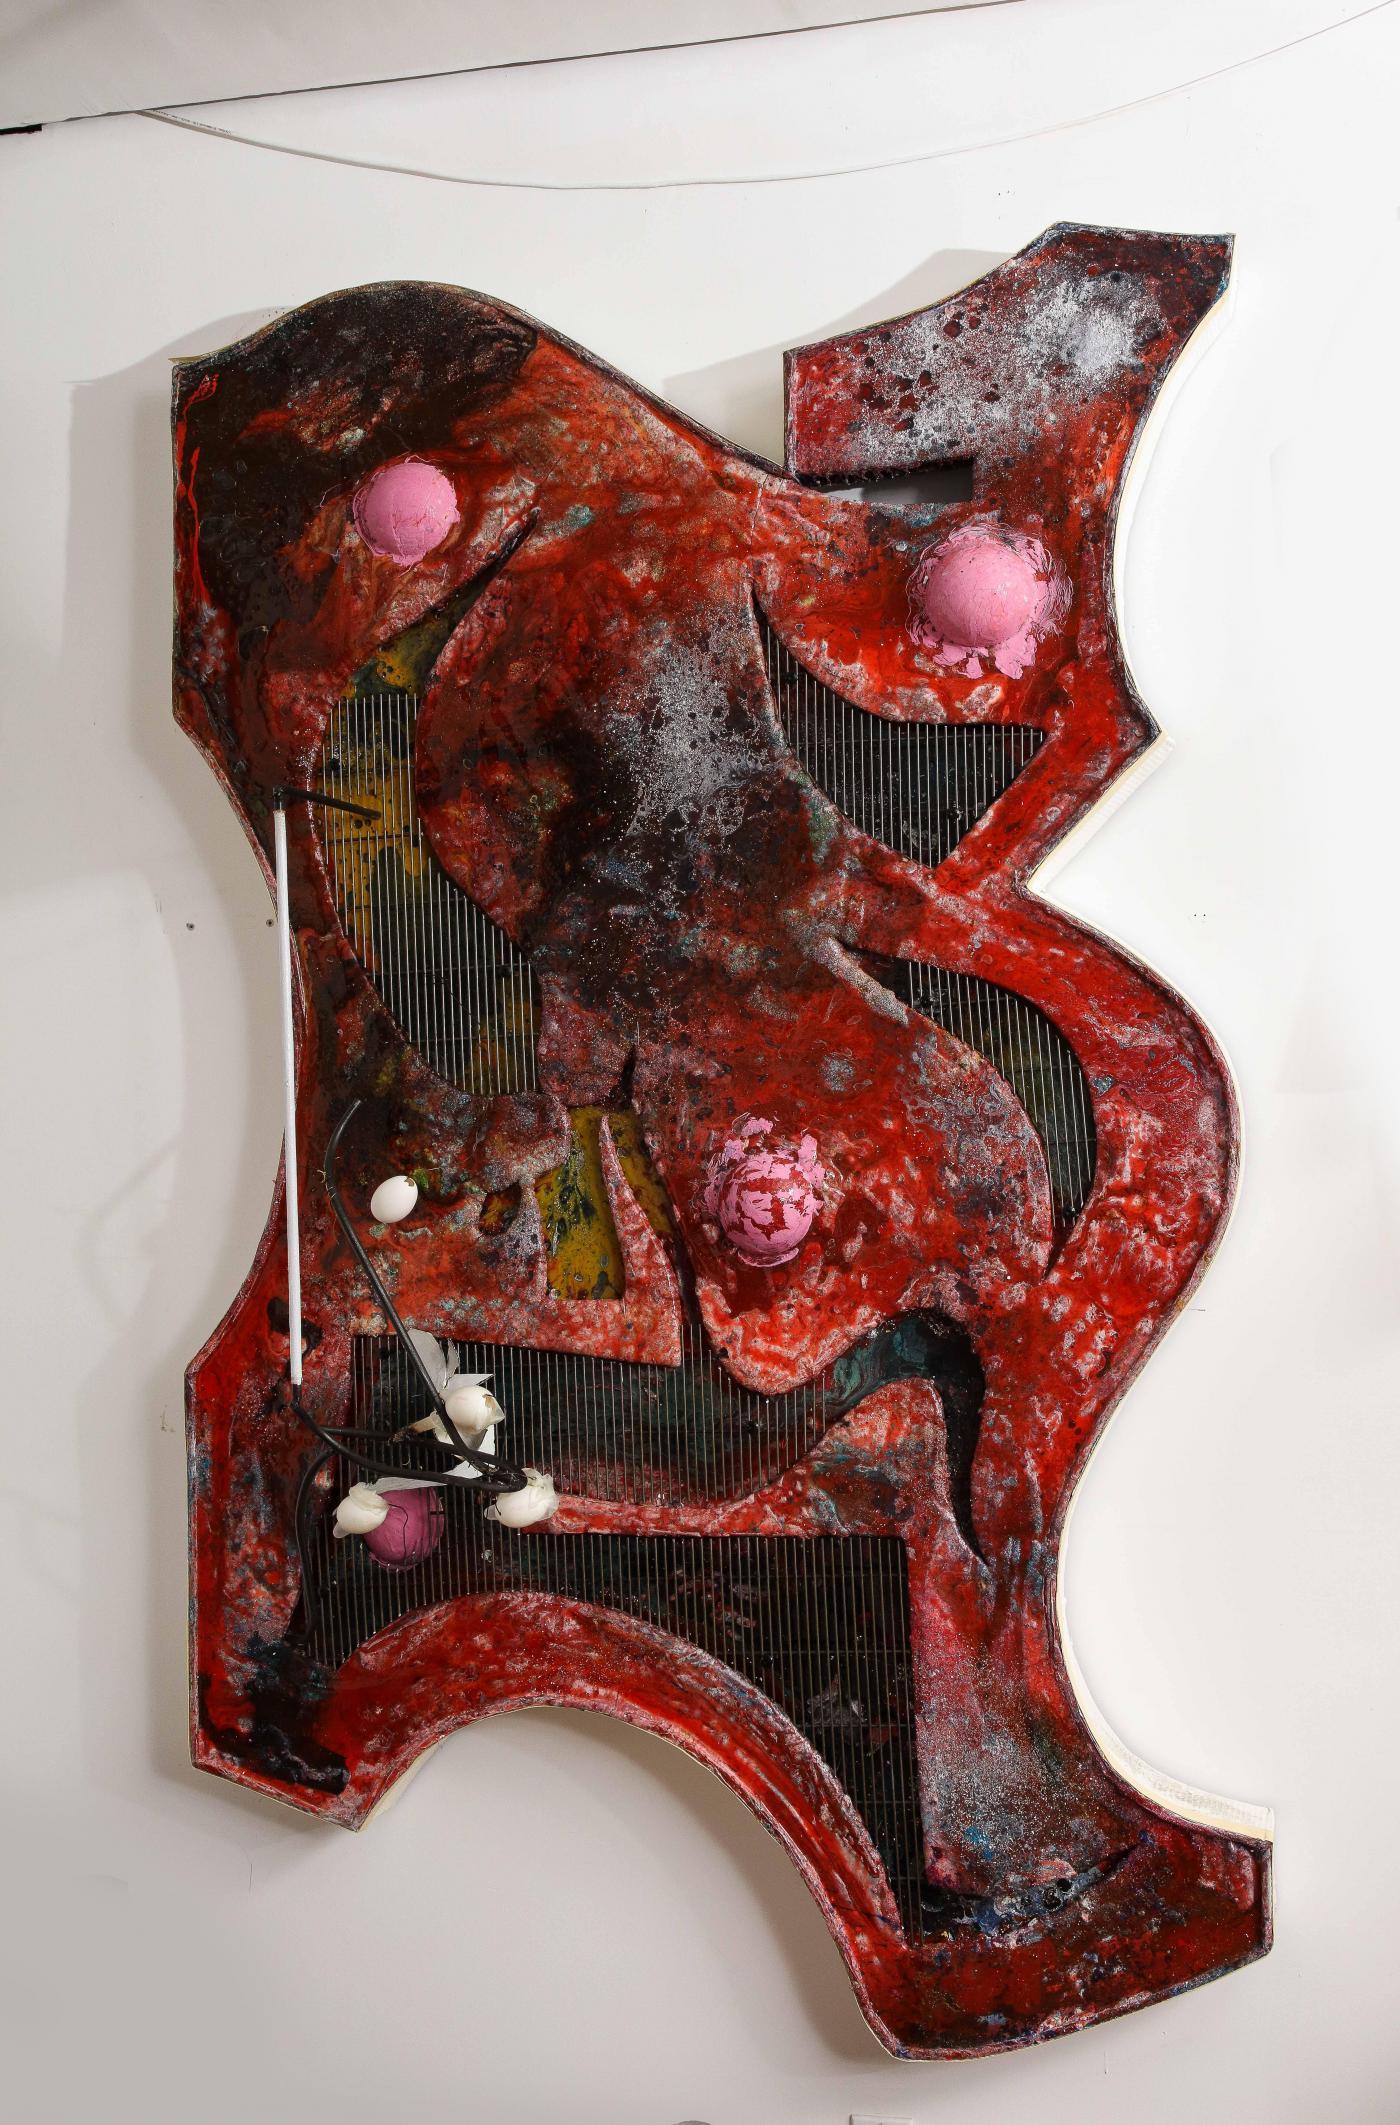 Modern Hero Gallow II Wall Sculpture/Painting in Wood and Plaster by David Douard, 2014 For Sale